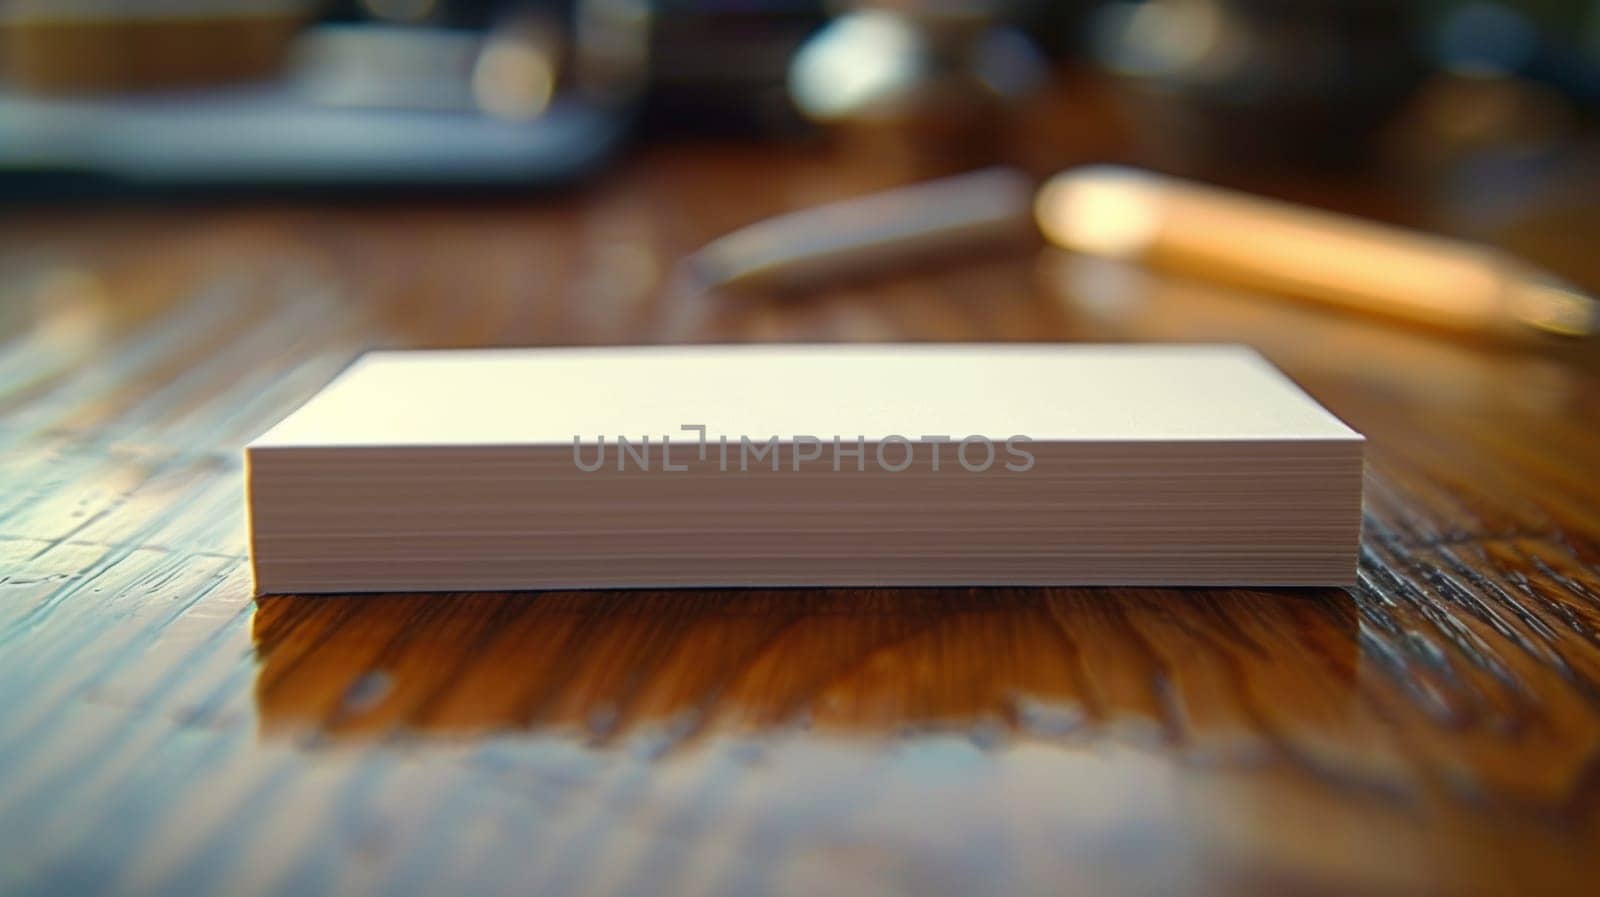 A stack of white business cards sitting on a wooden table